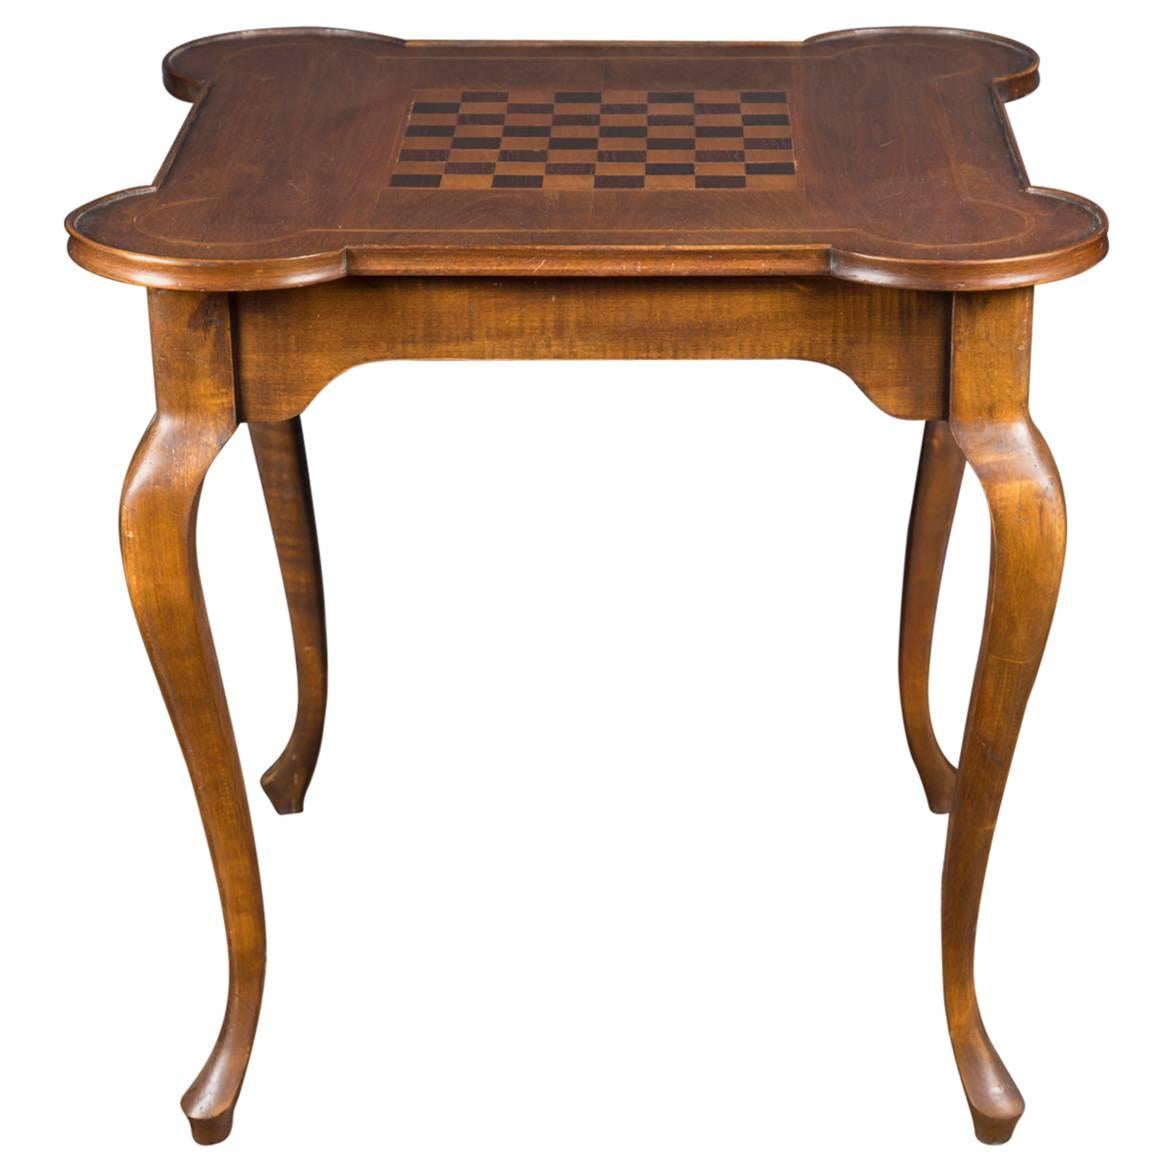 Italian 20th Century Game Table with Inlaid Chess/Checkerboard and Cabriole Legs For Sale